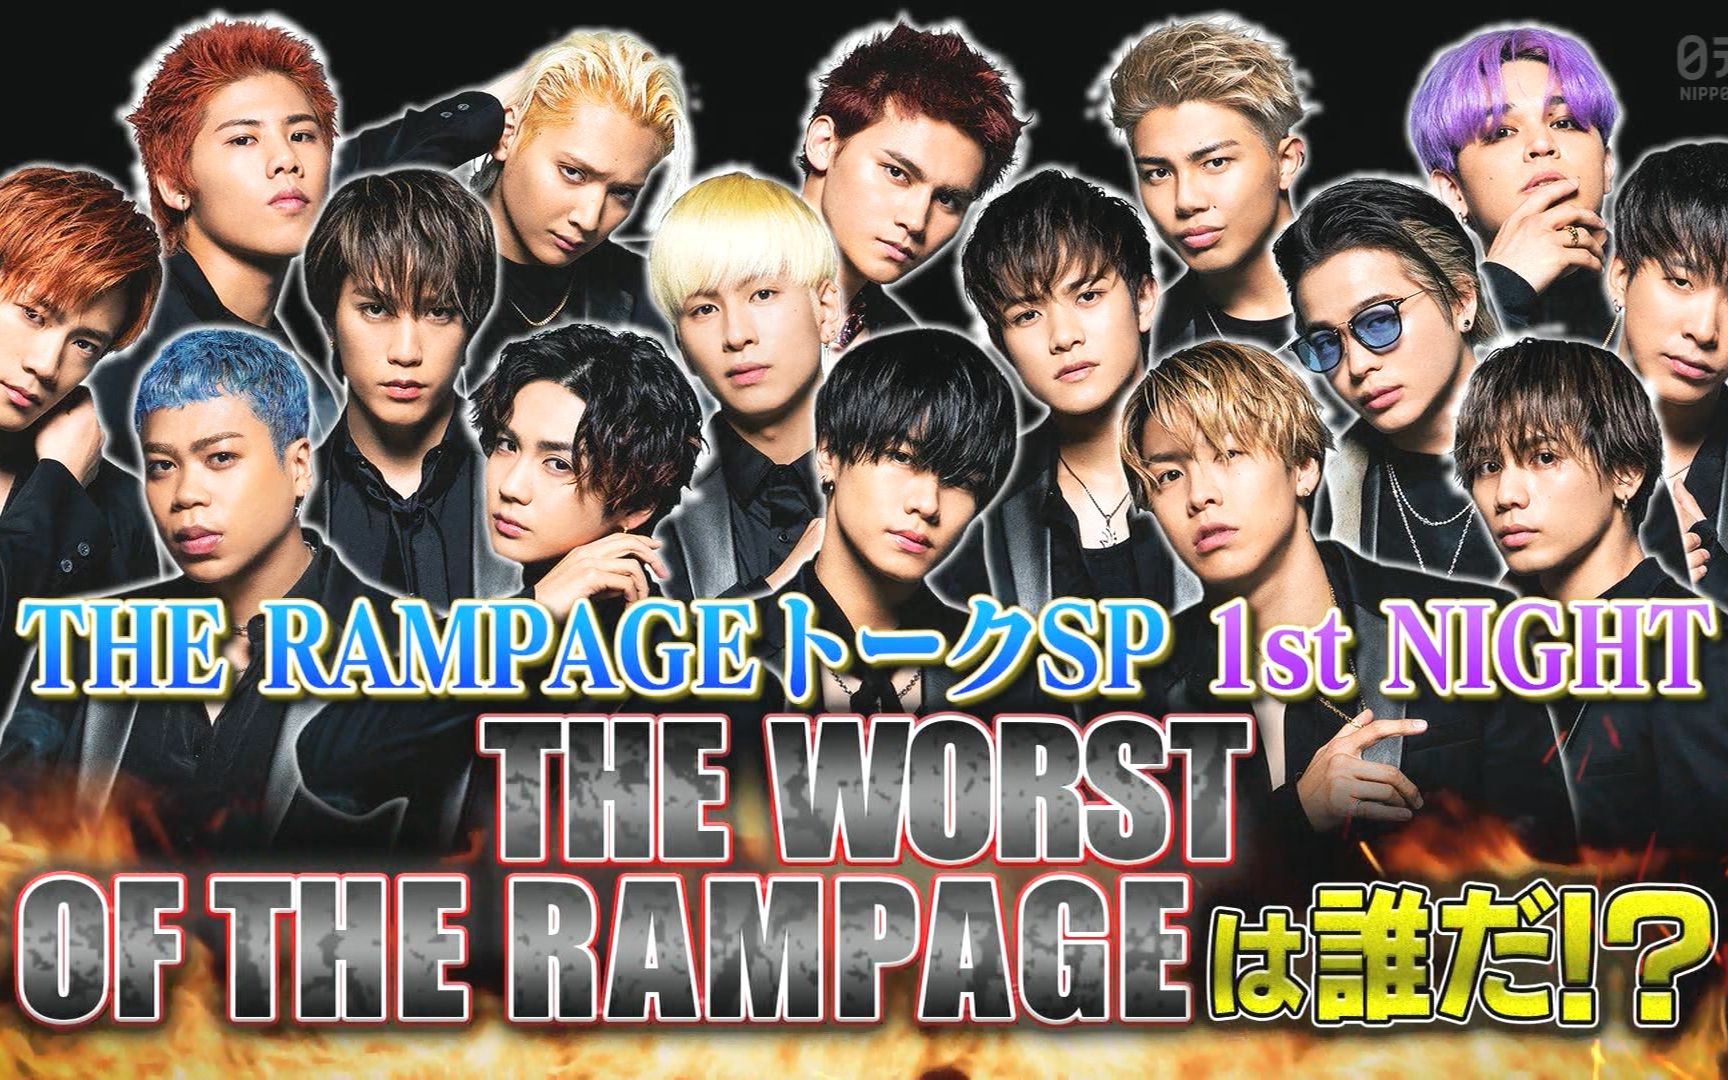 01 The Worst Of The Rampage Special Talk 1st Night 哔哩哔哩 つロ干杯 Bilibili